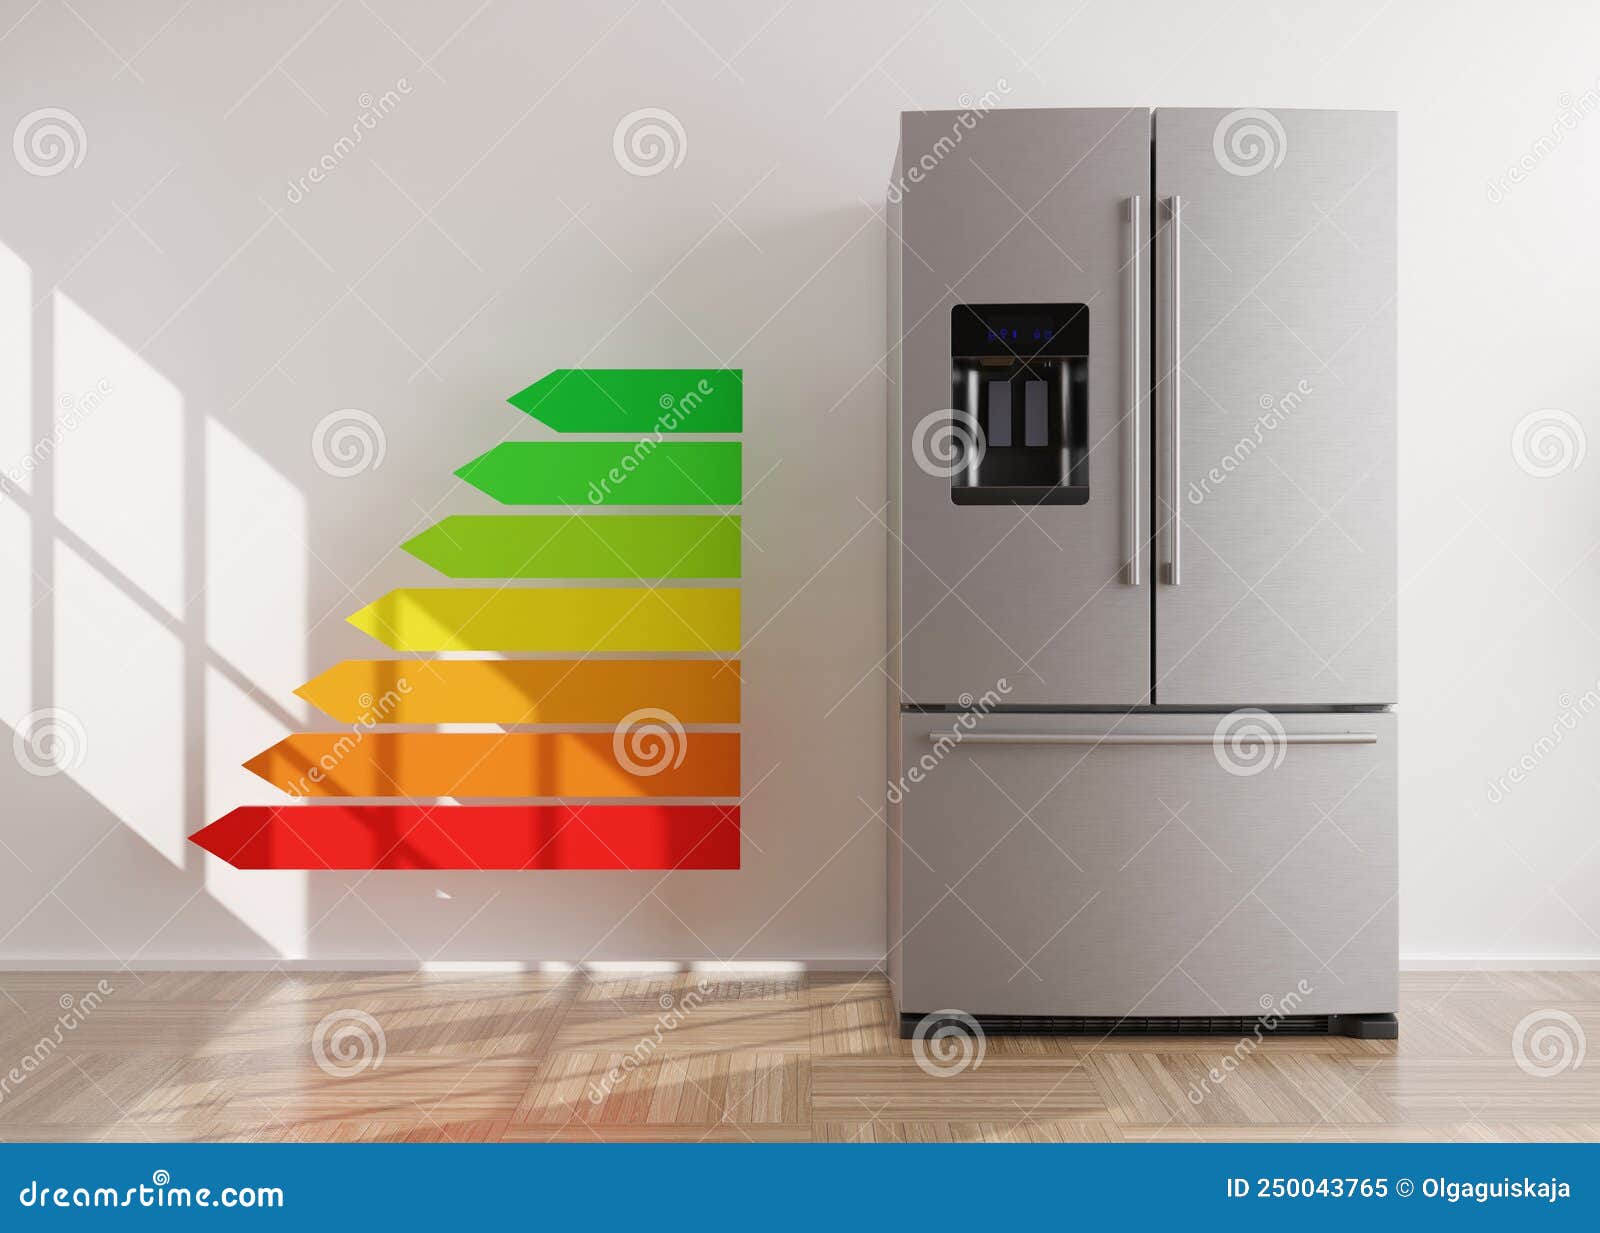 refrigerator and energy efficiency rating chart. household